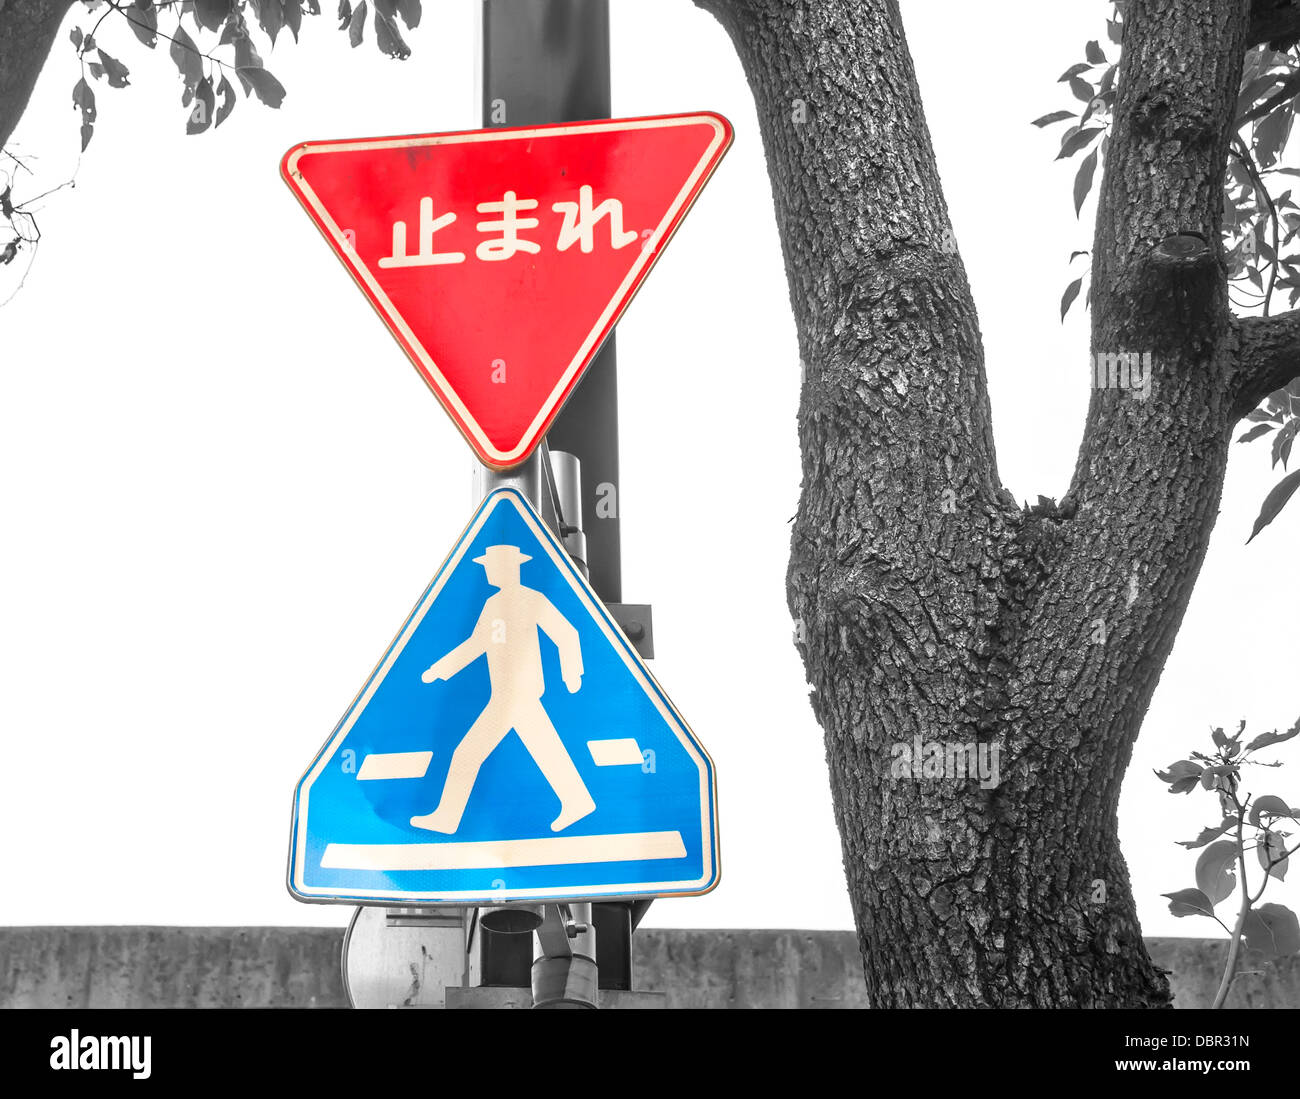 Japanese road sign with color signals and the rest of the black & white photography Stock Photo